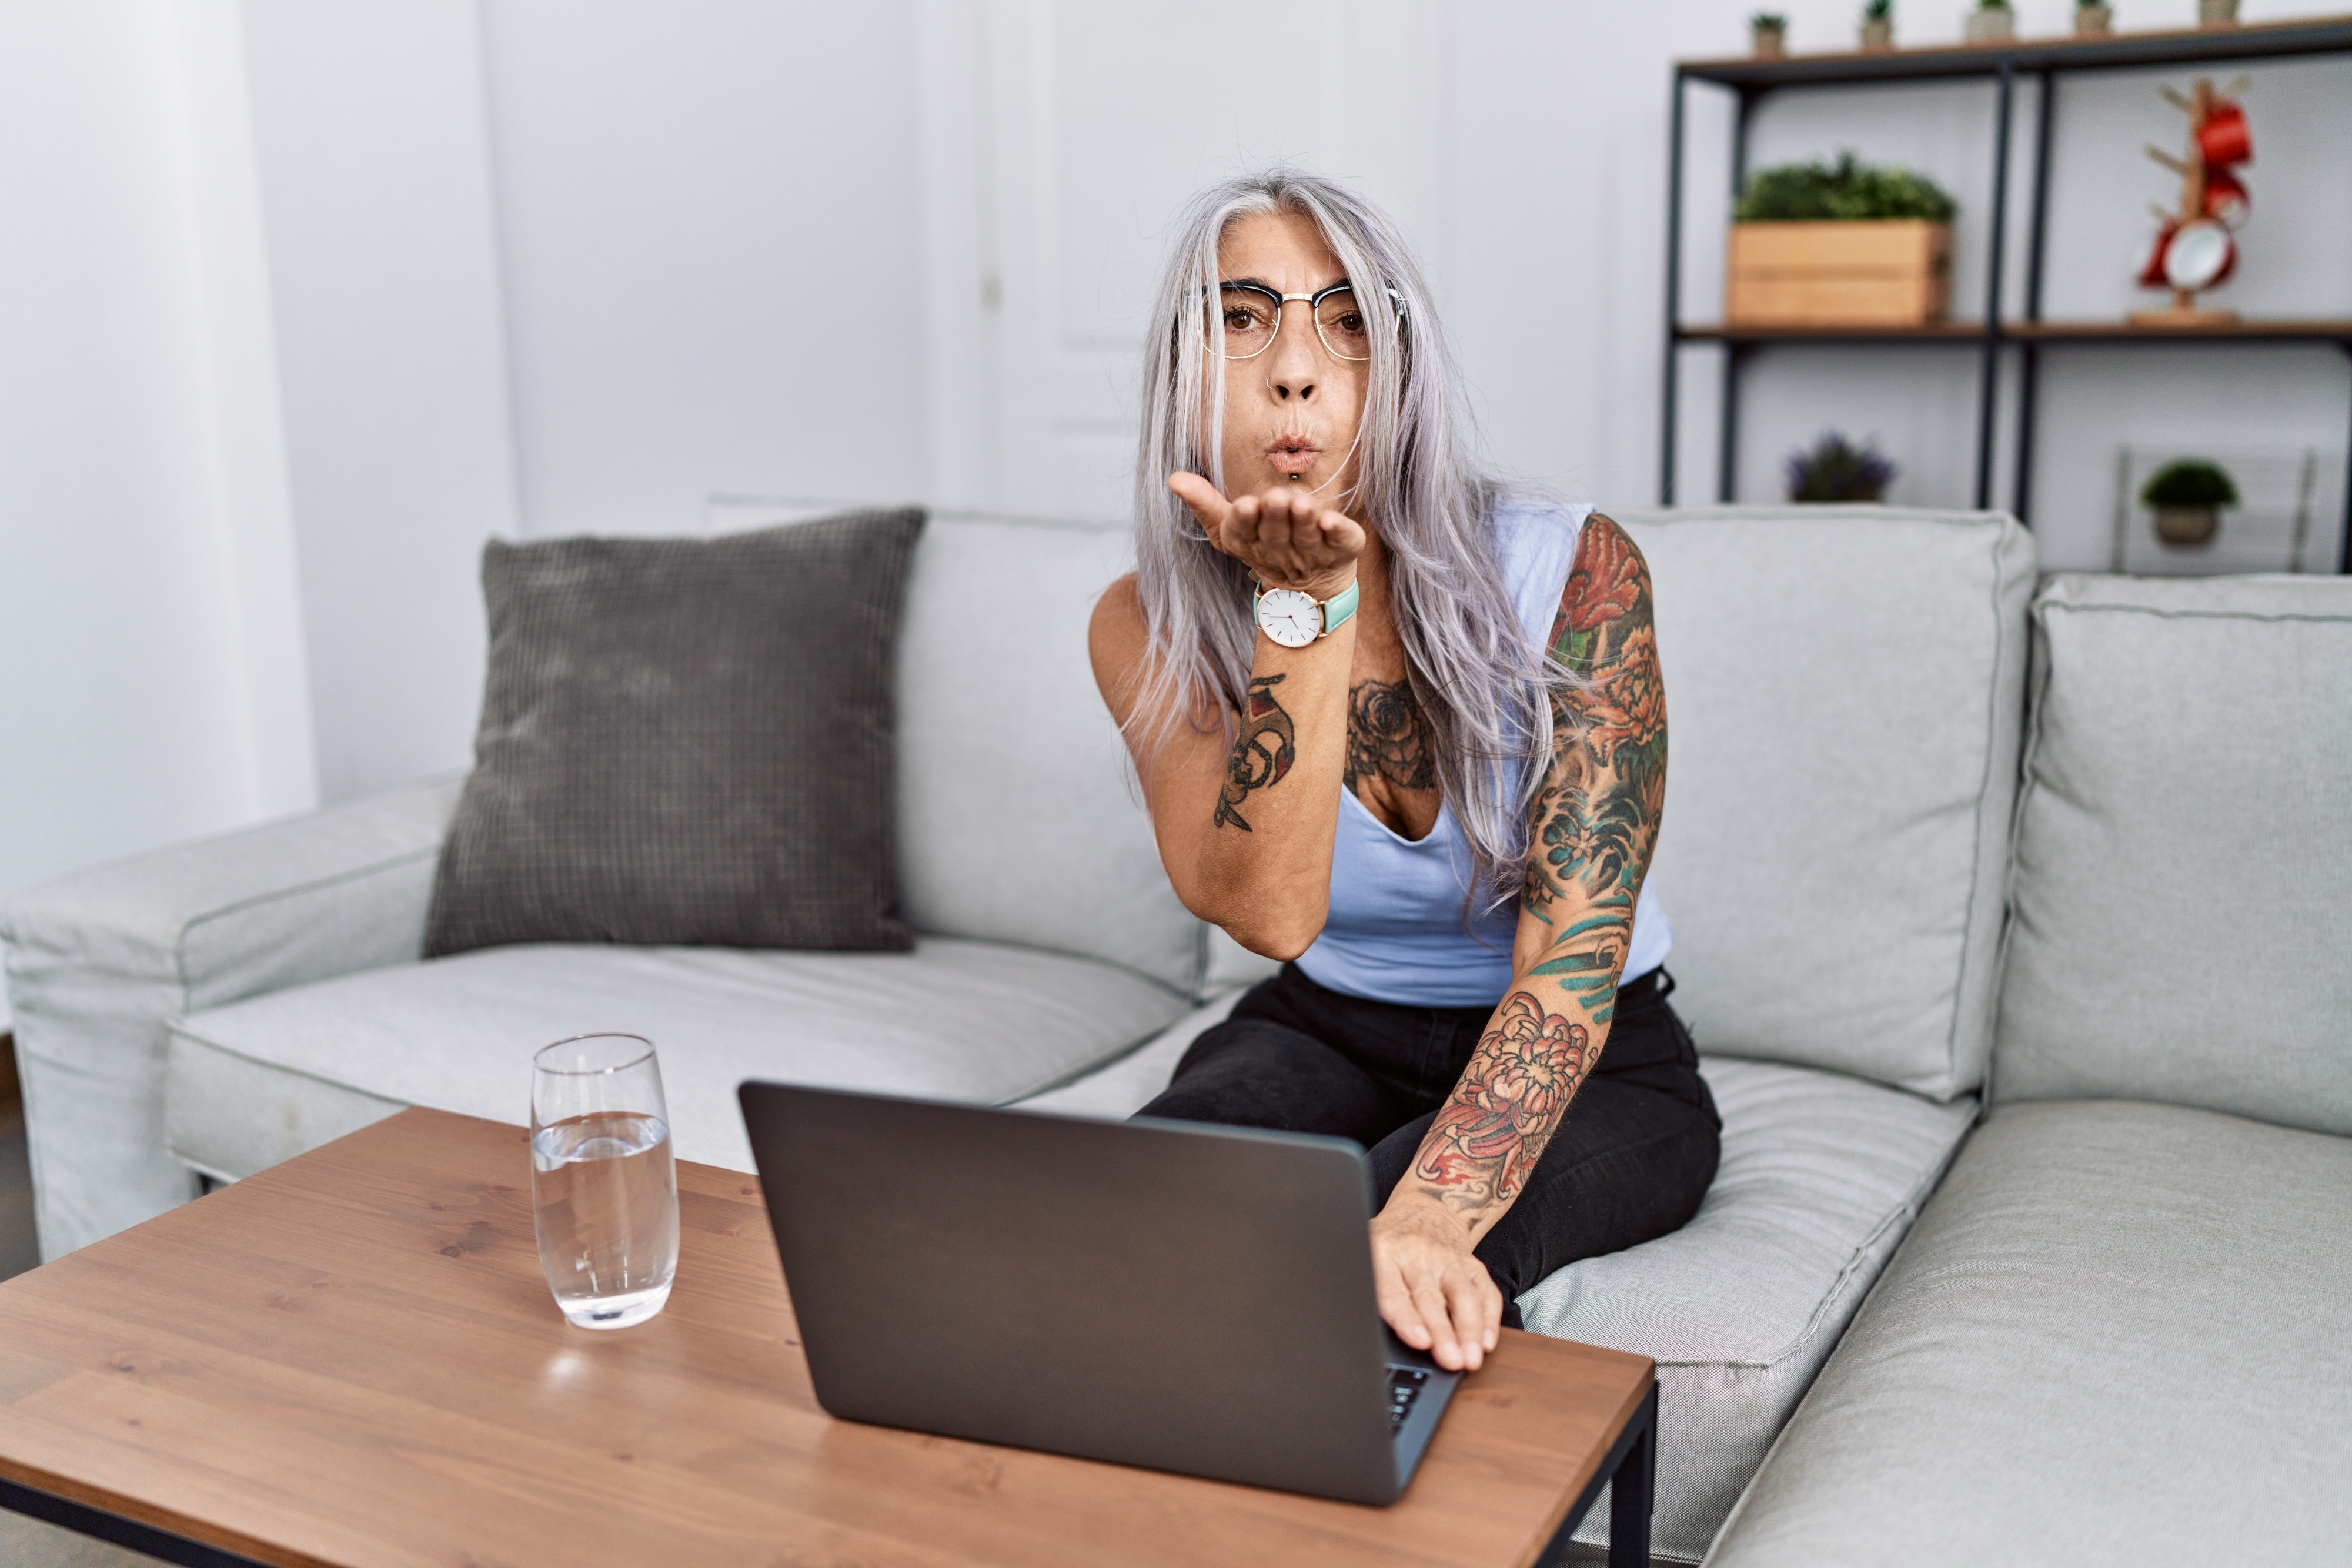 Person with tattoos sitting at a laptop, sending a blowing kiss gesture toward the camera